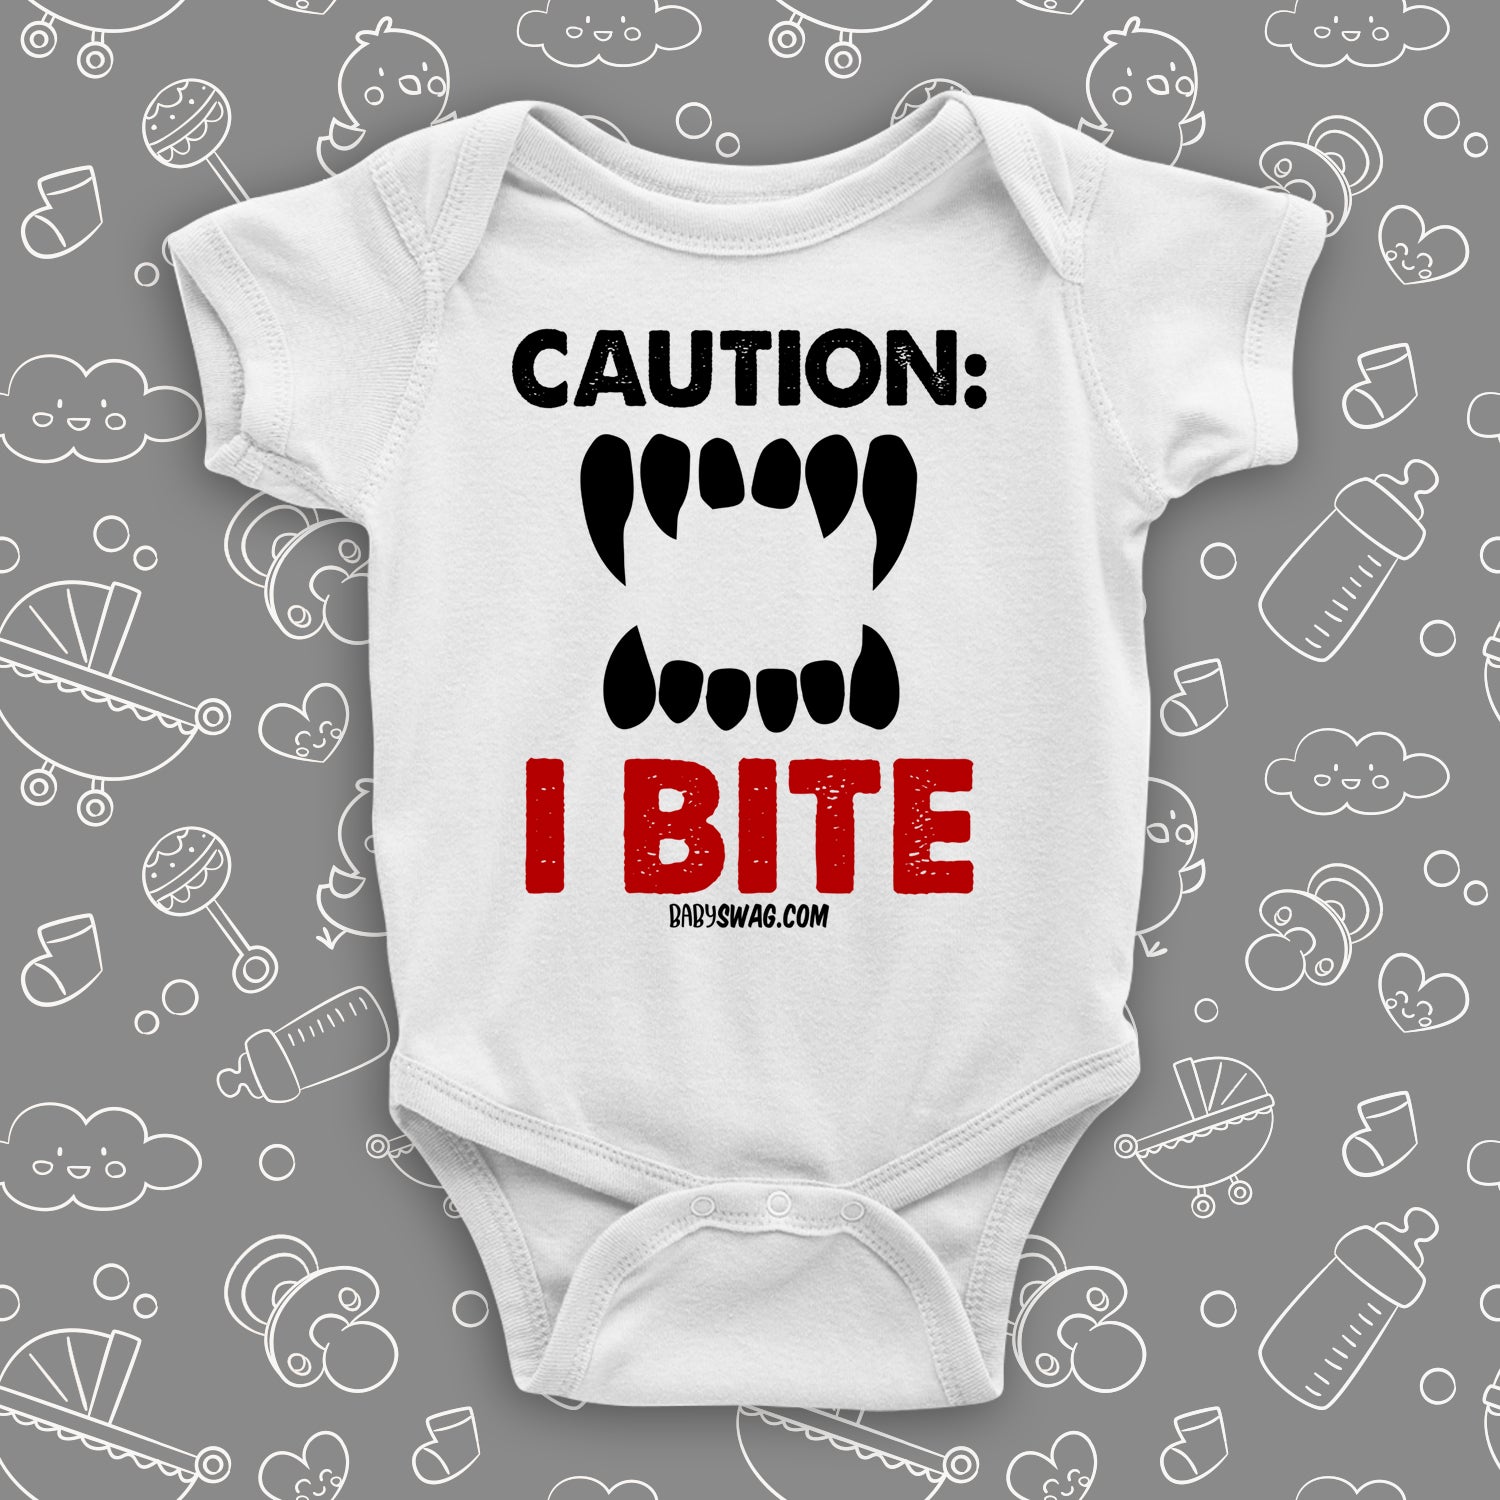 Funny baby onesie saying "Caution: I bite" with an image of scary teeth, color white.